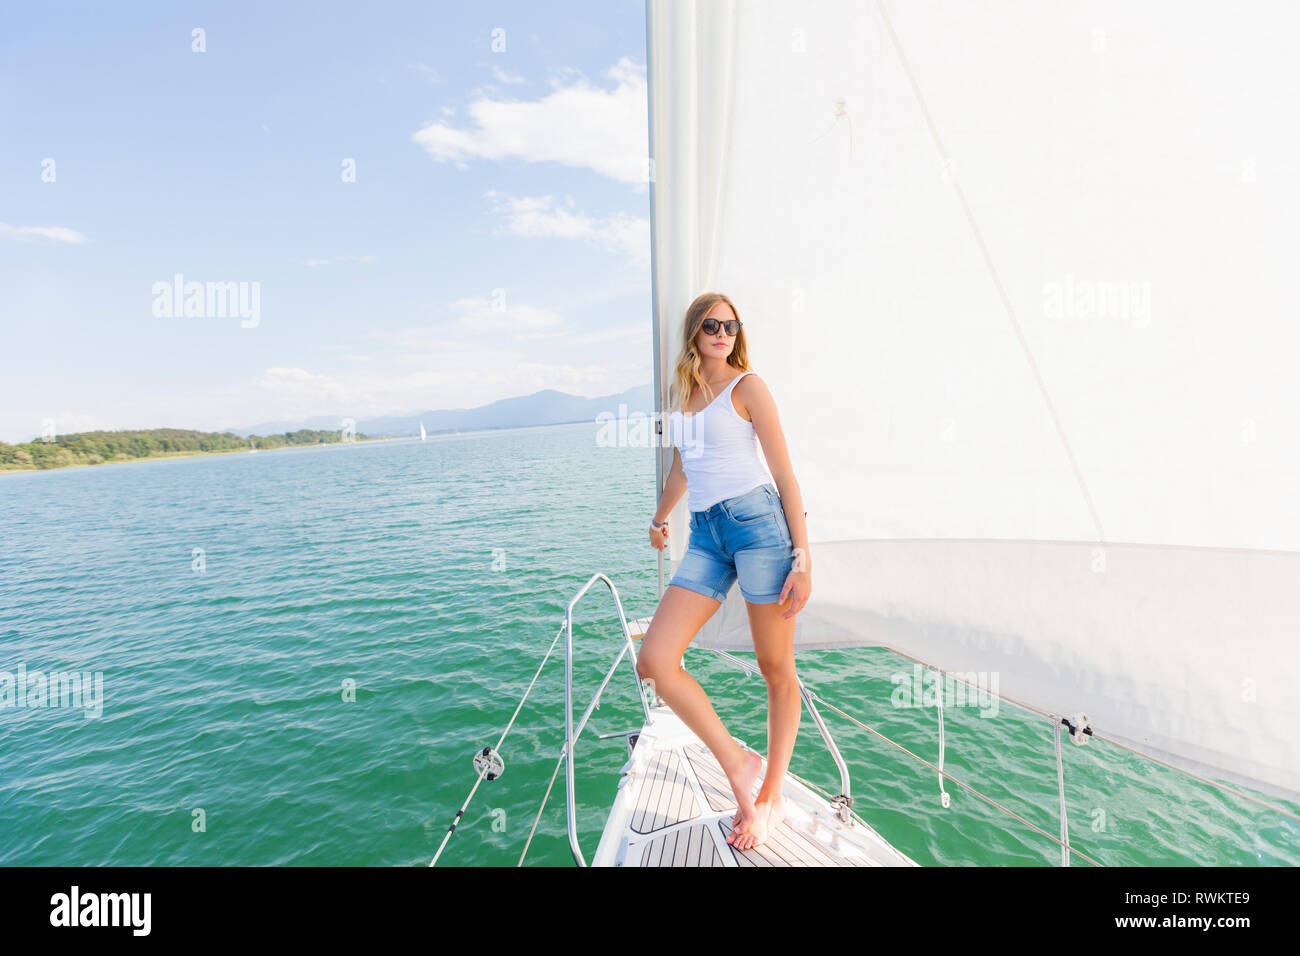 Young woman on sailboat on Chiemsee lake, portrait, Bavaria, Germany Stock Photo